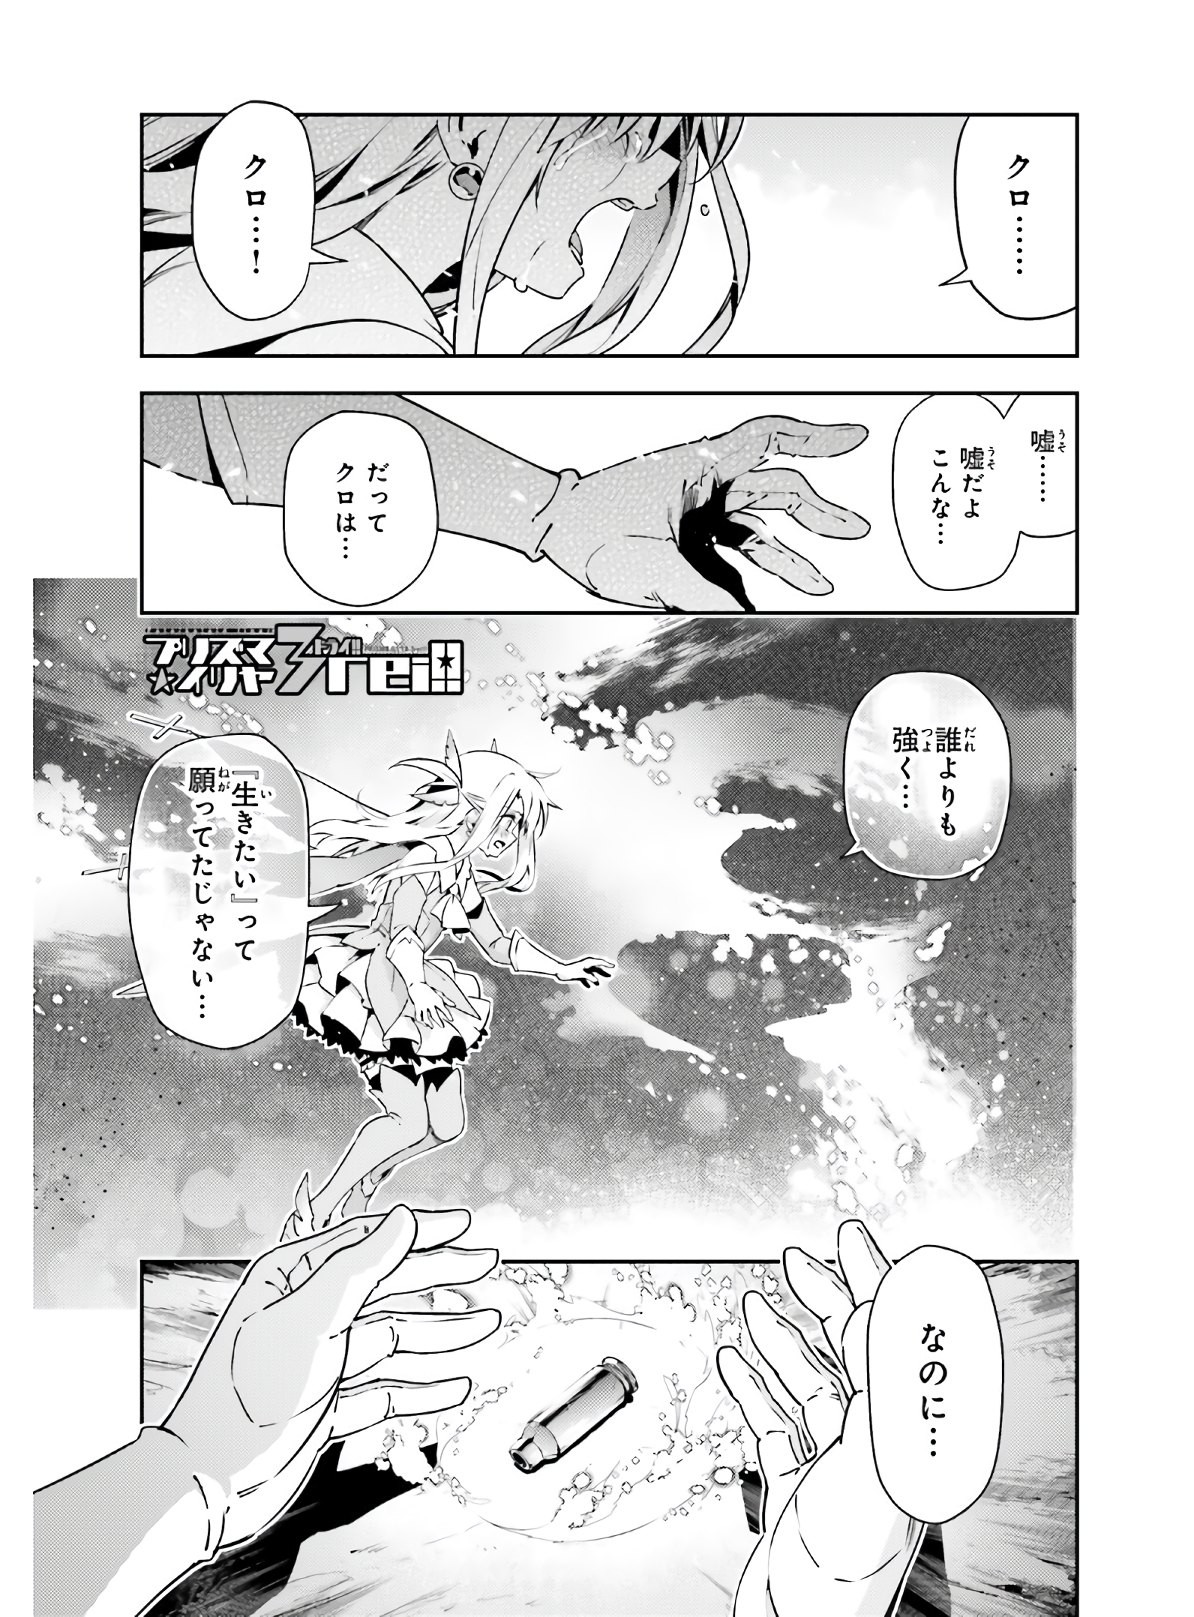 Fate/Kaleid Liner Prisma Illya Drei! - Chapter 60 - Page 1